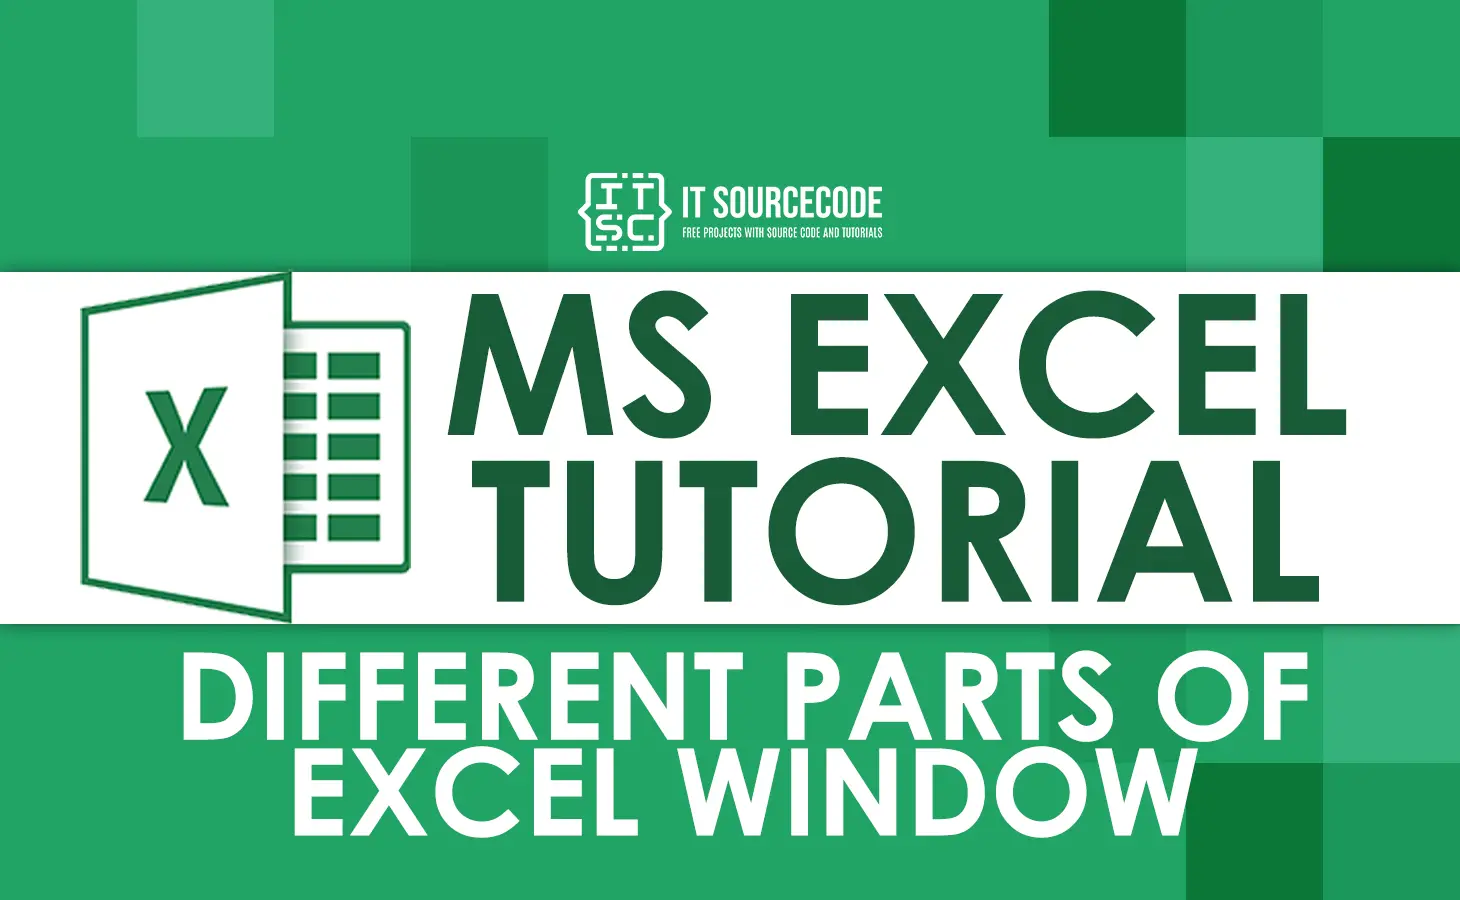 Different Parts of Excel Window